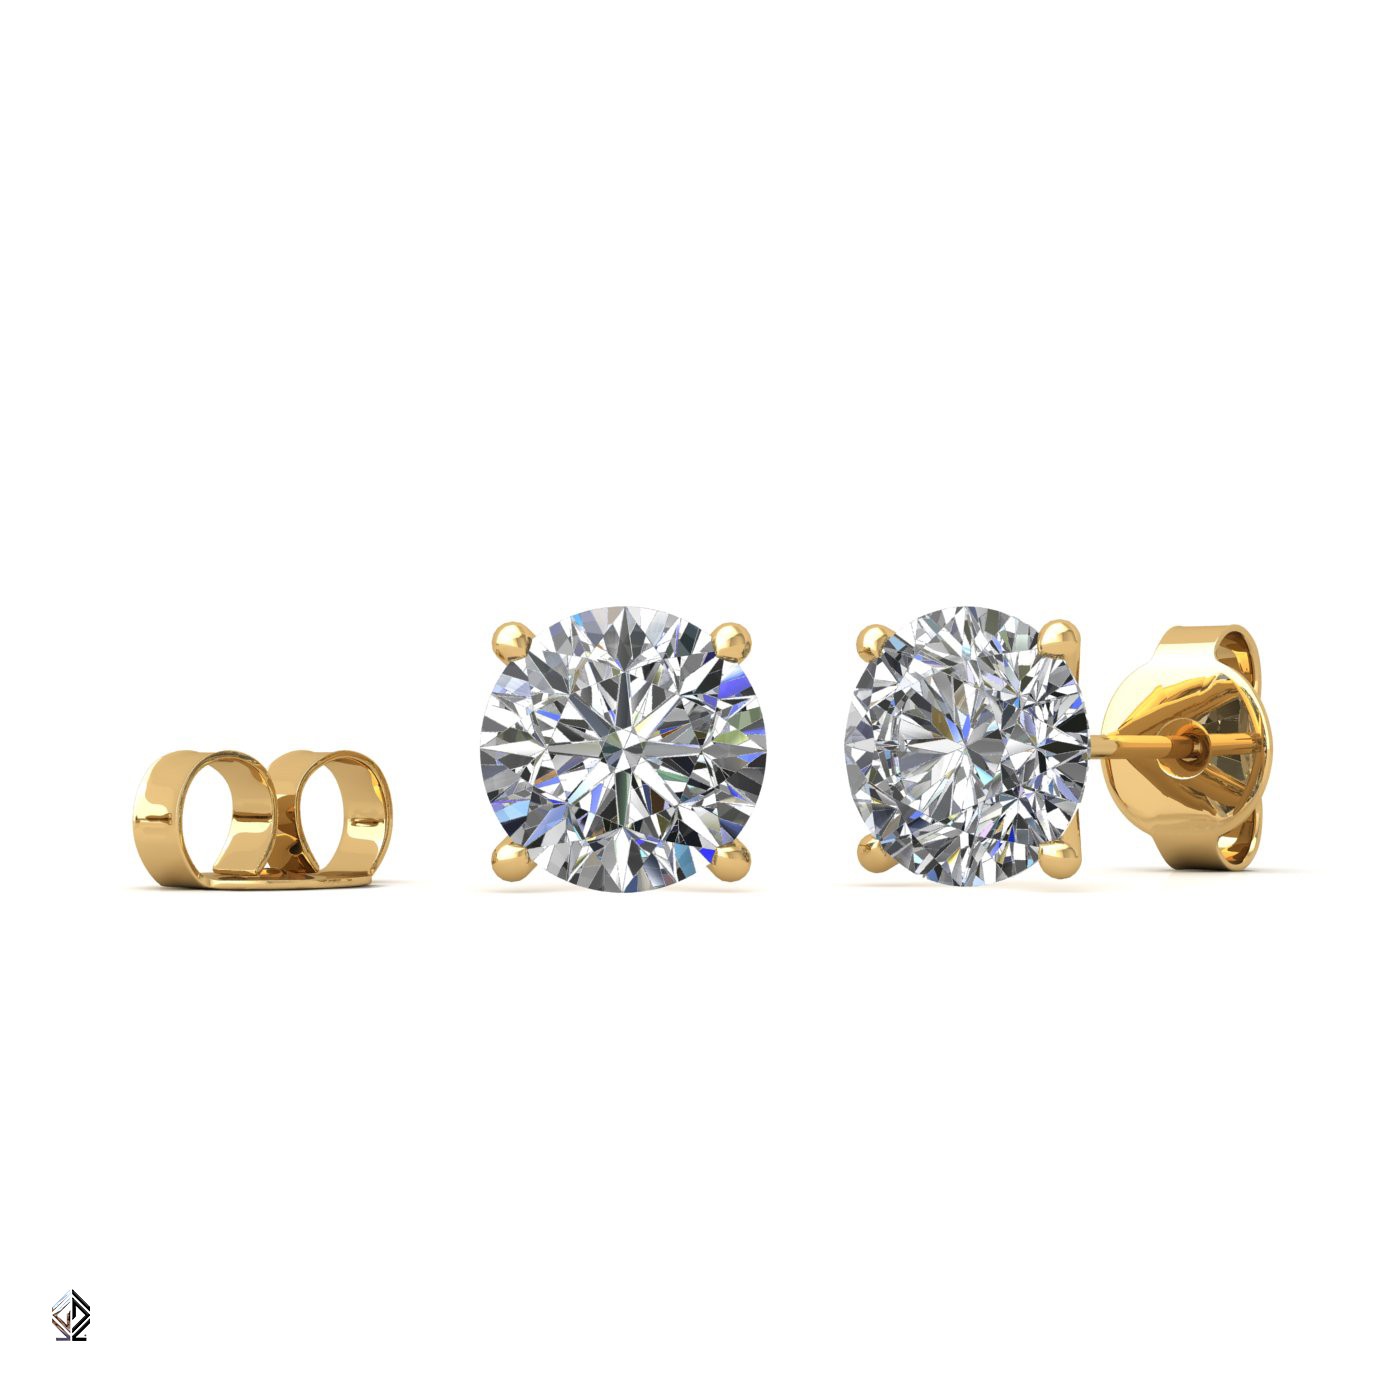 18k white gold 0,7 ct each (1,4 tcw) 4 prongs round cut classic diamond earring studs Photos & images